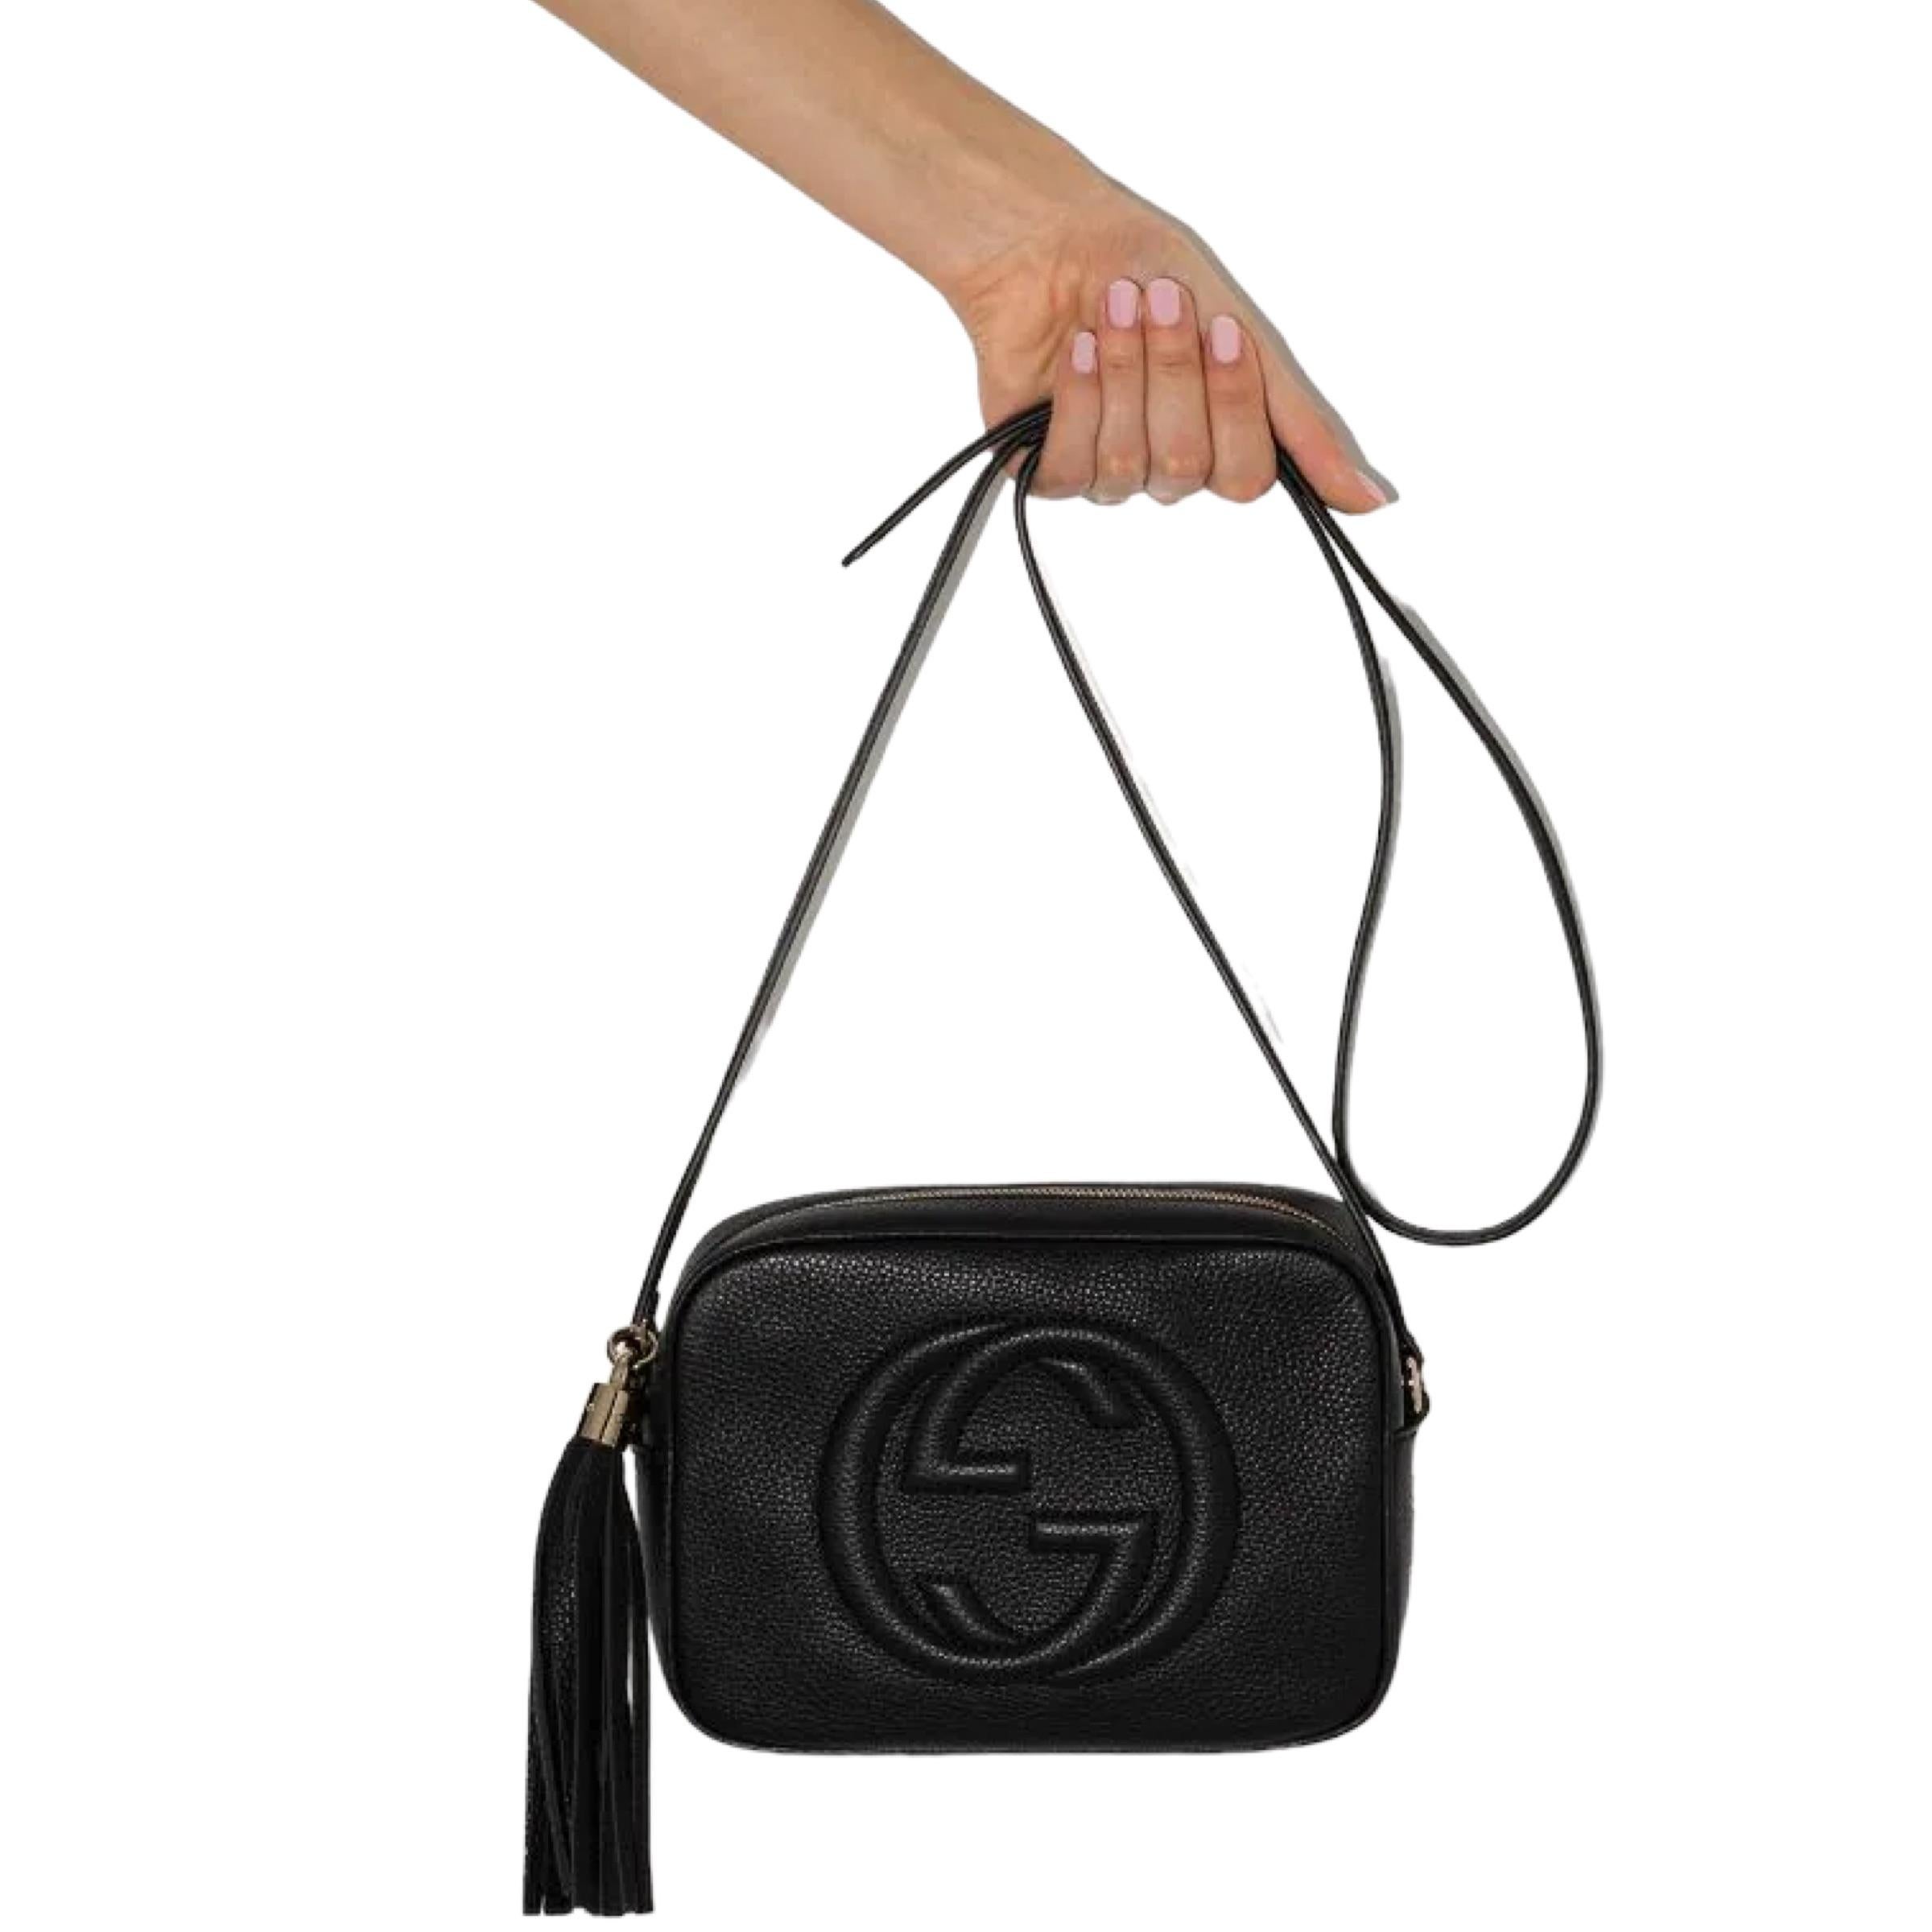 NEW Gucci Black Small Soho Disco Leather Crossbody Bag For Sale 12